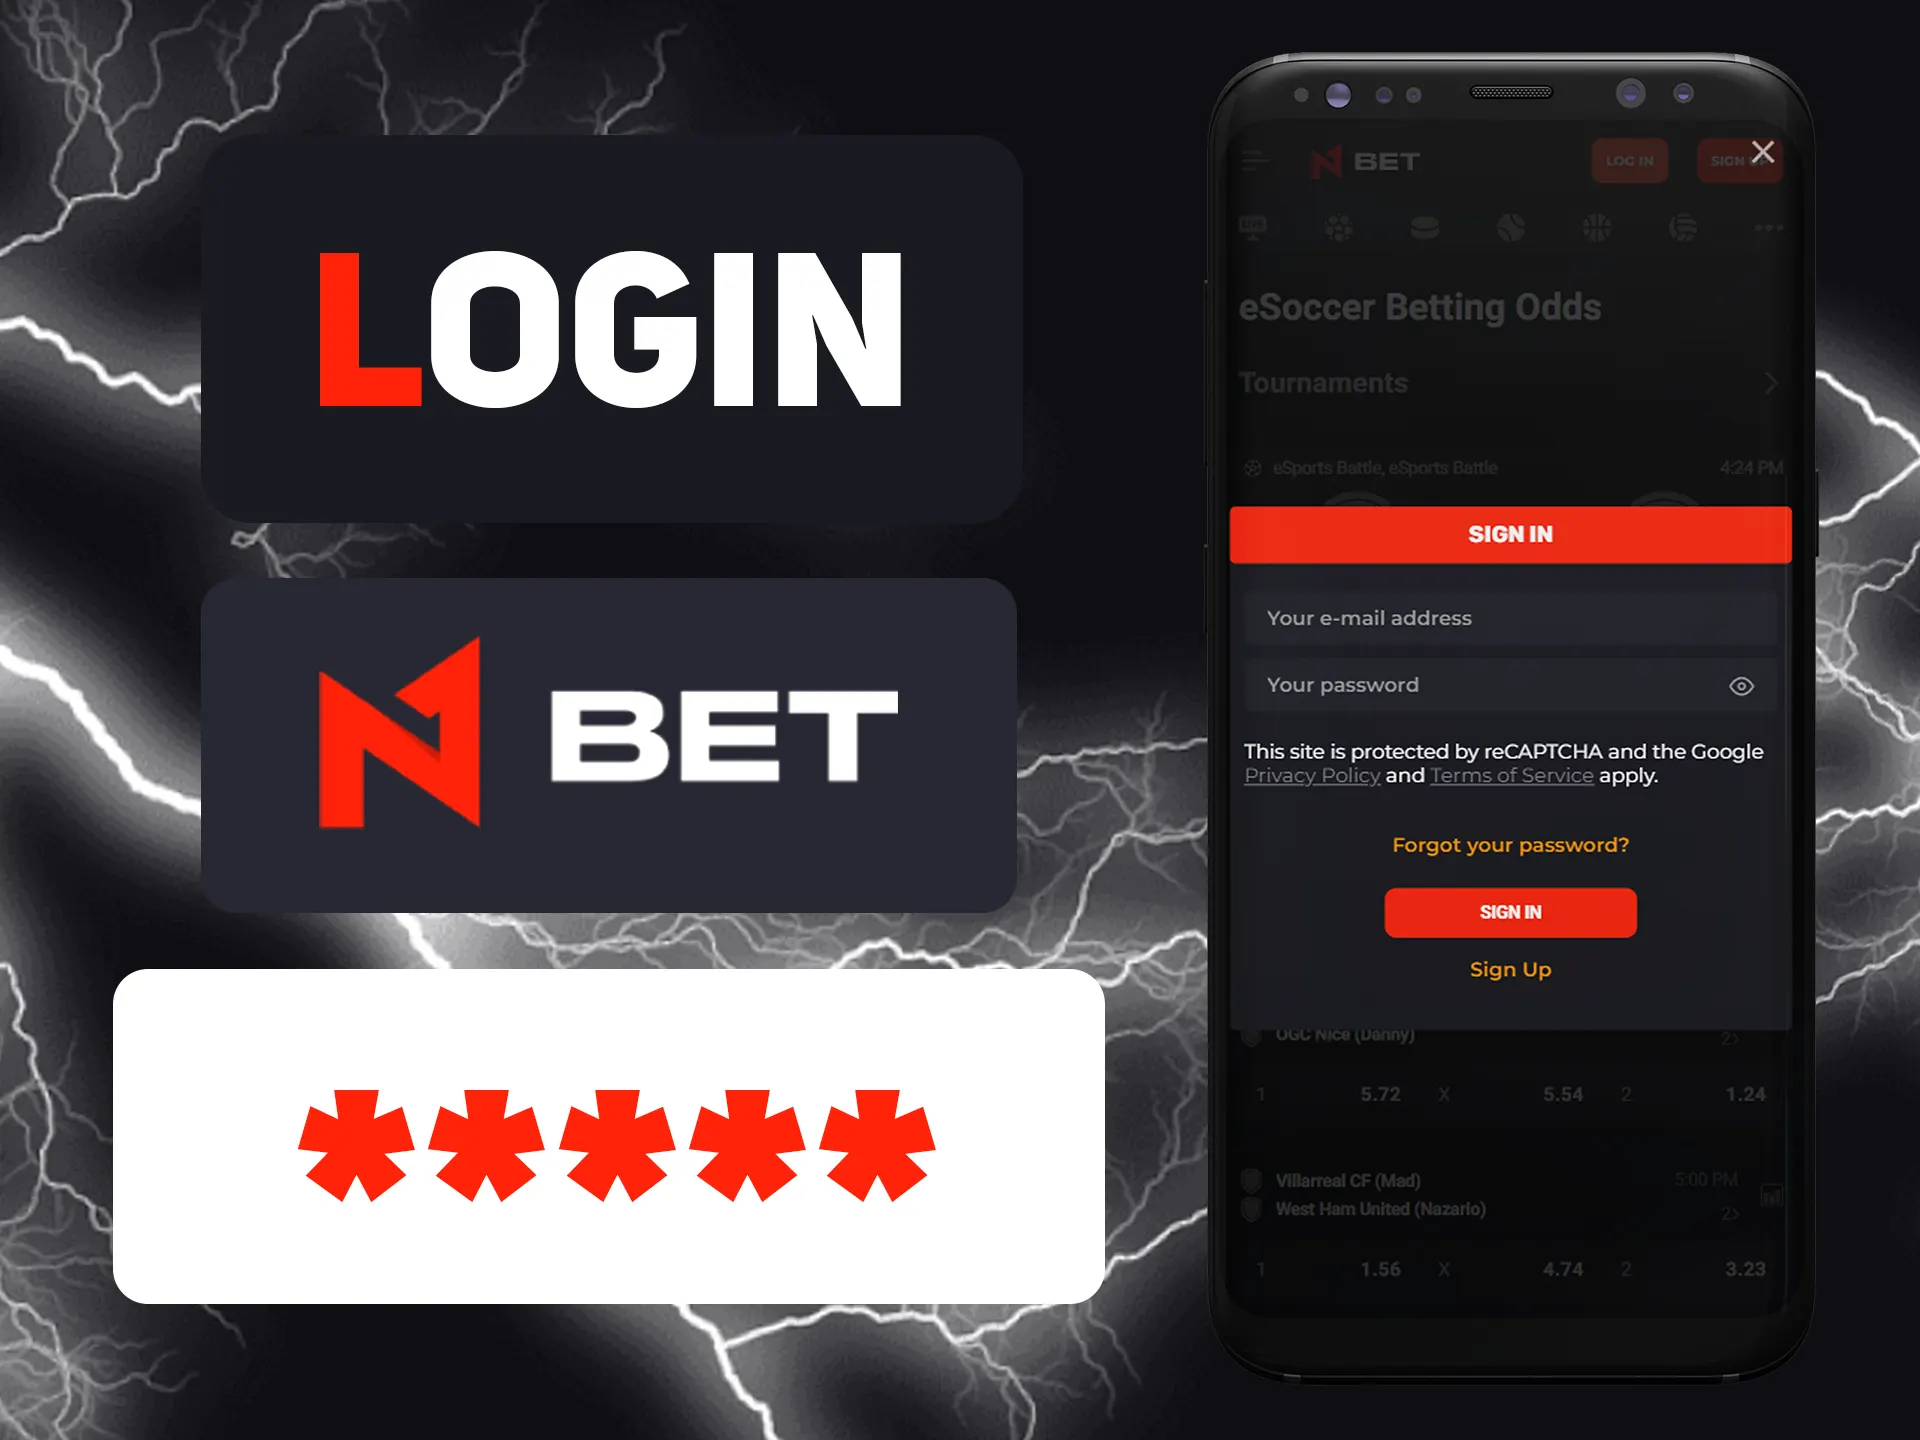 Sign in in N1bet app using your N1bet account data.